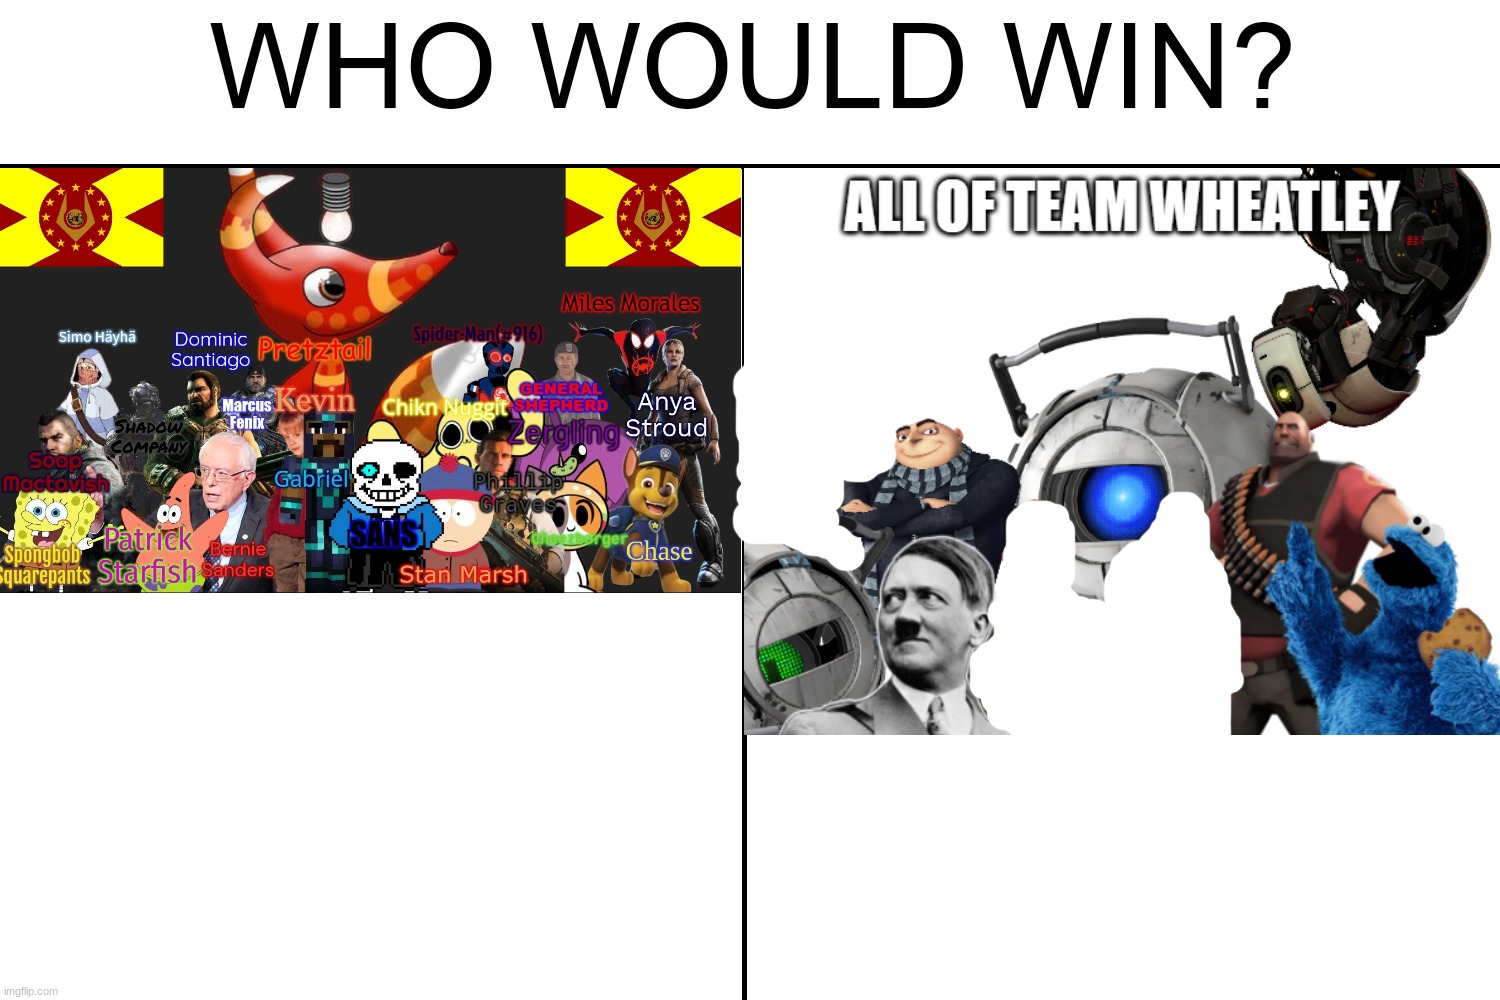 kinda obvious if you remove the bullshitting factor that wheatley uses | image tagged in who would win | made w/ Imgflip meme maker